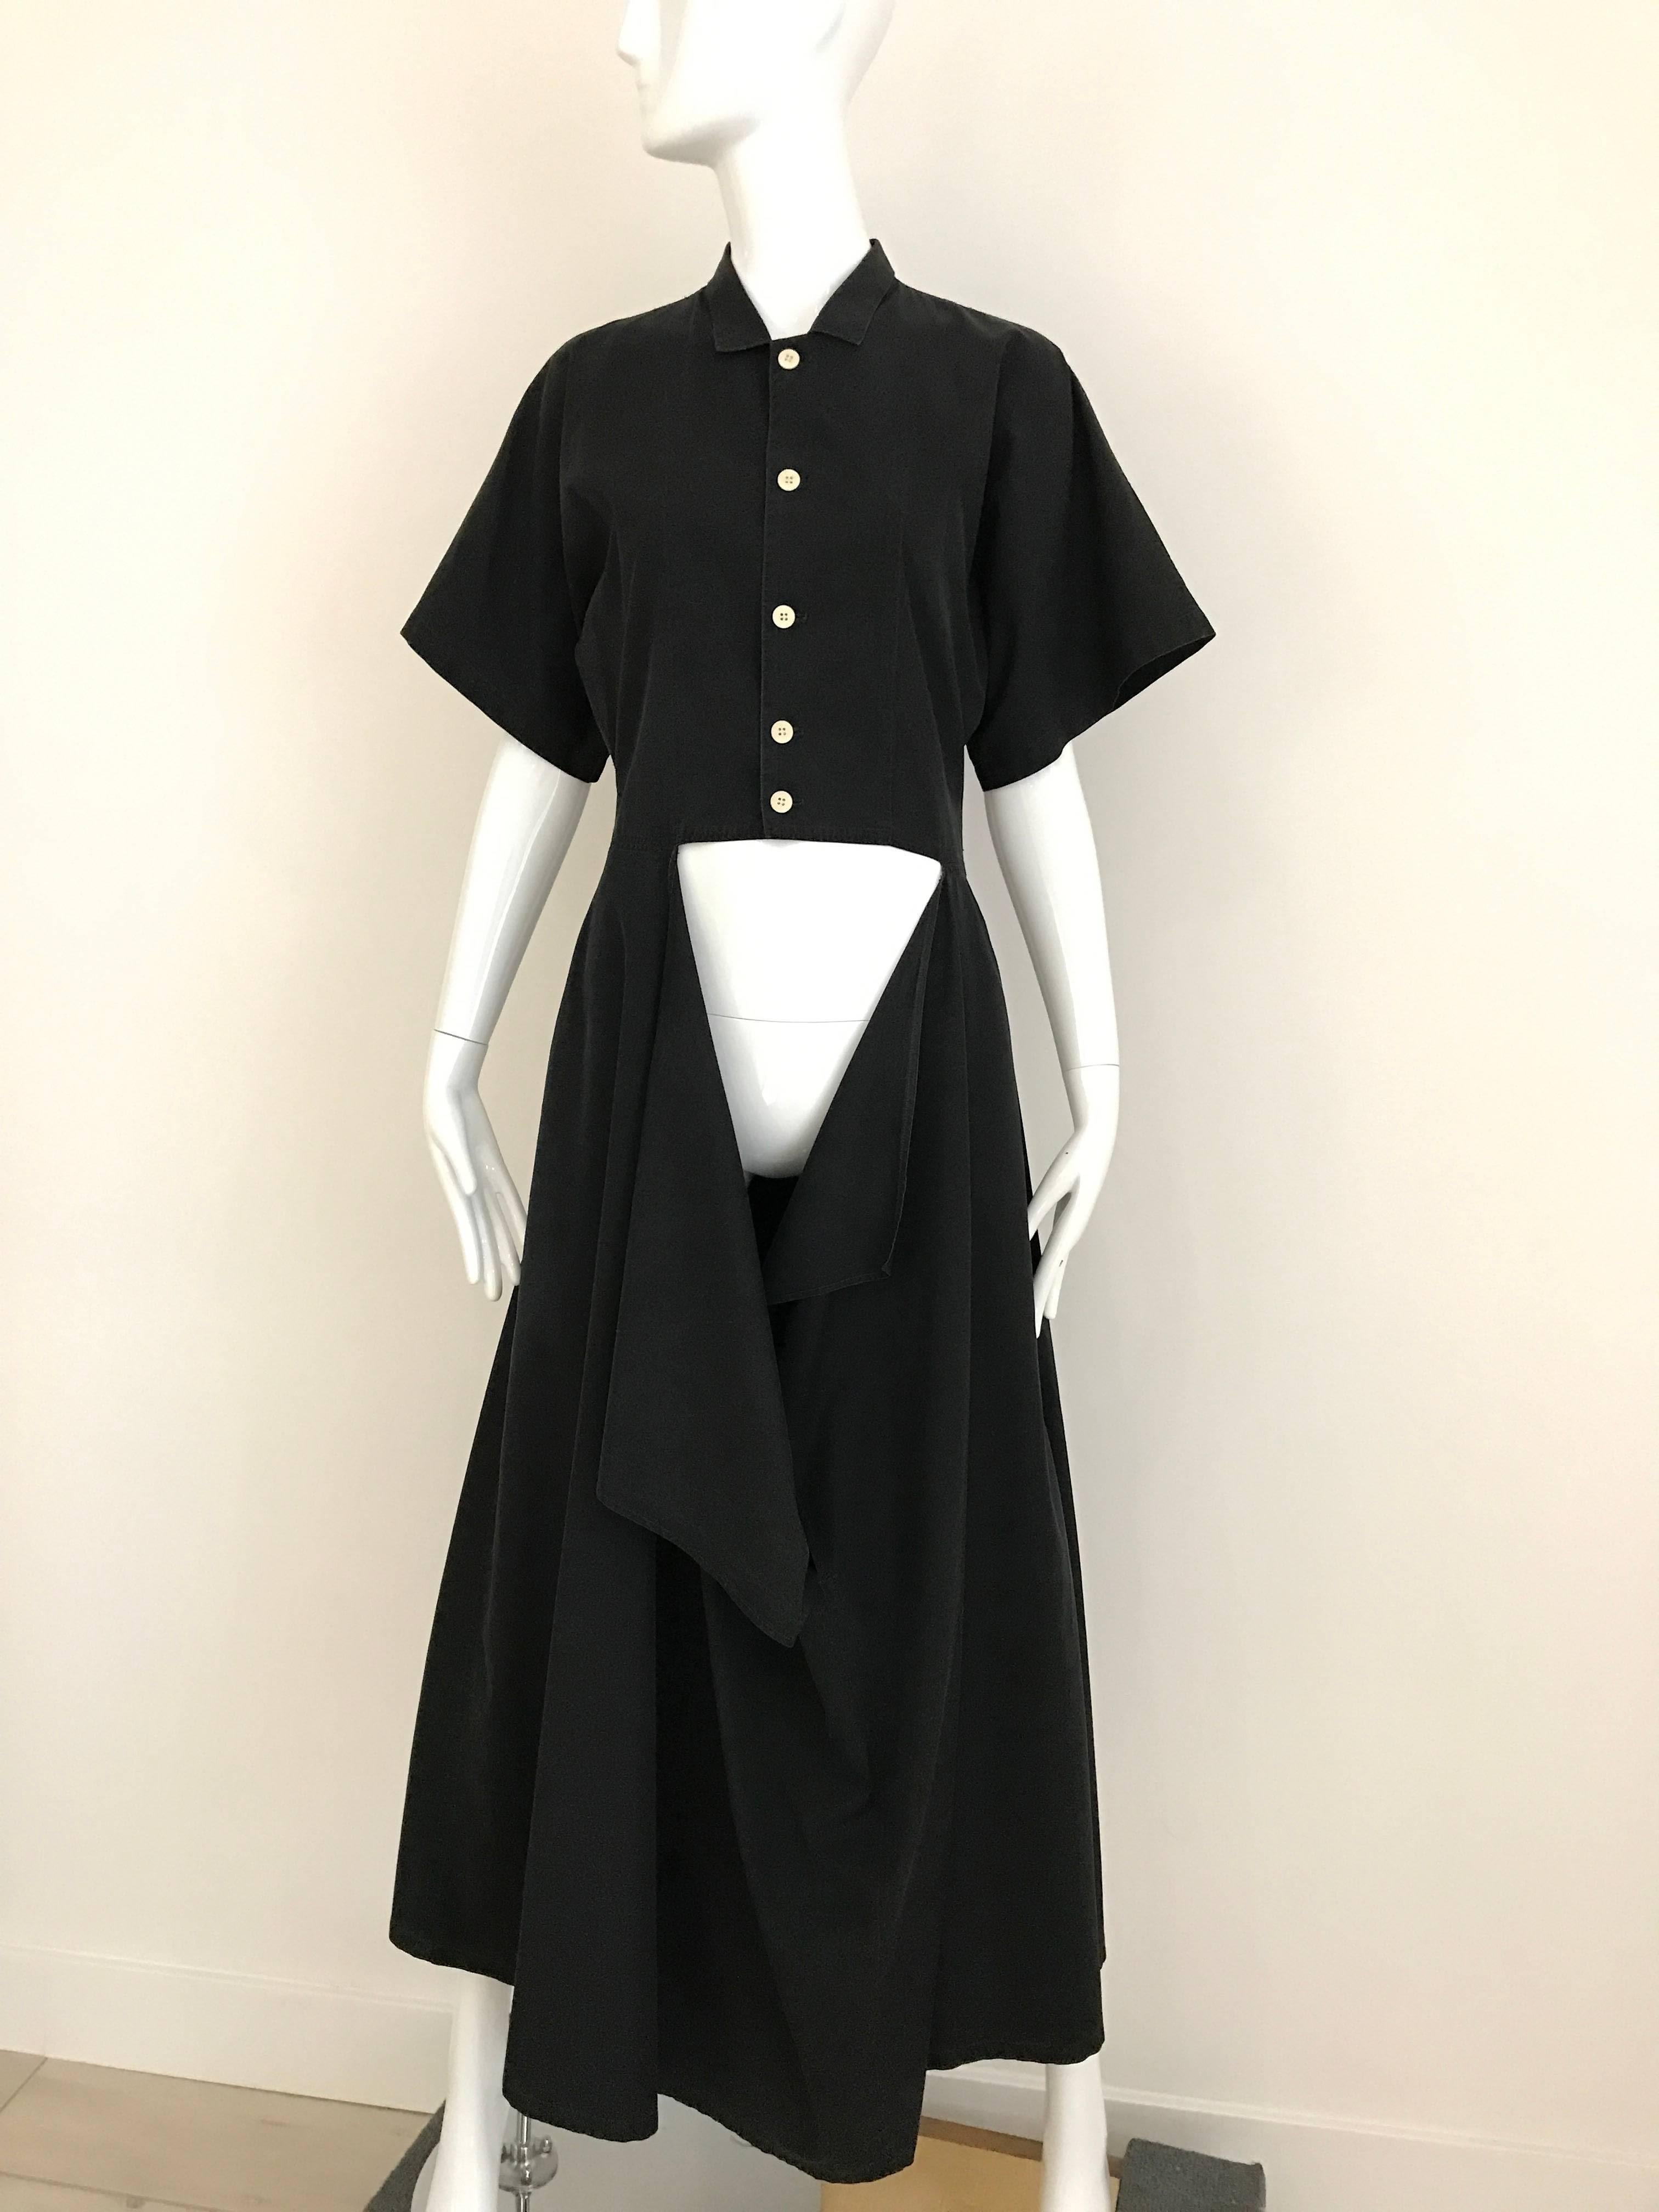 Vintage 1990s Yohji Yamamoto Black Cotton Dress with Cut out wrap skirt.
Size: Medium
Bust: 36 inch/ Waist: 28 inch/ Hip: 40/ Length: 52
**** This Garment has been professionally Dry Cleaned and Ready to wear.